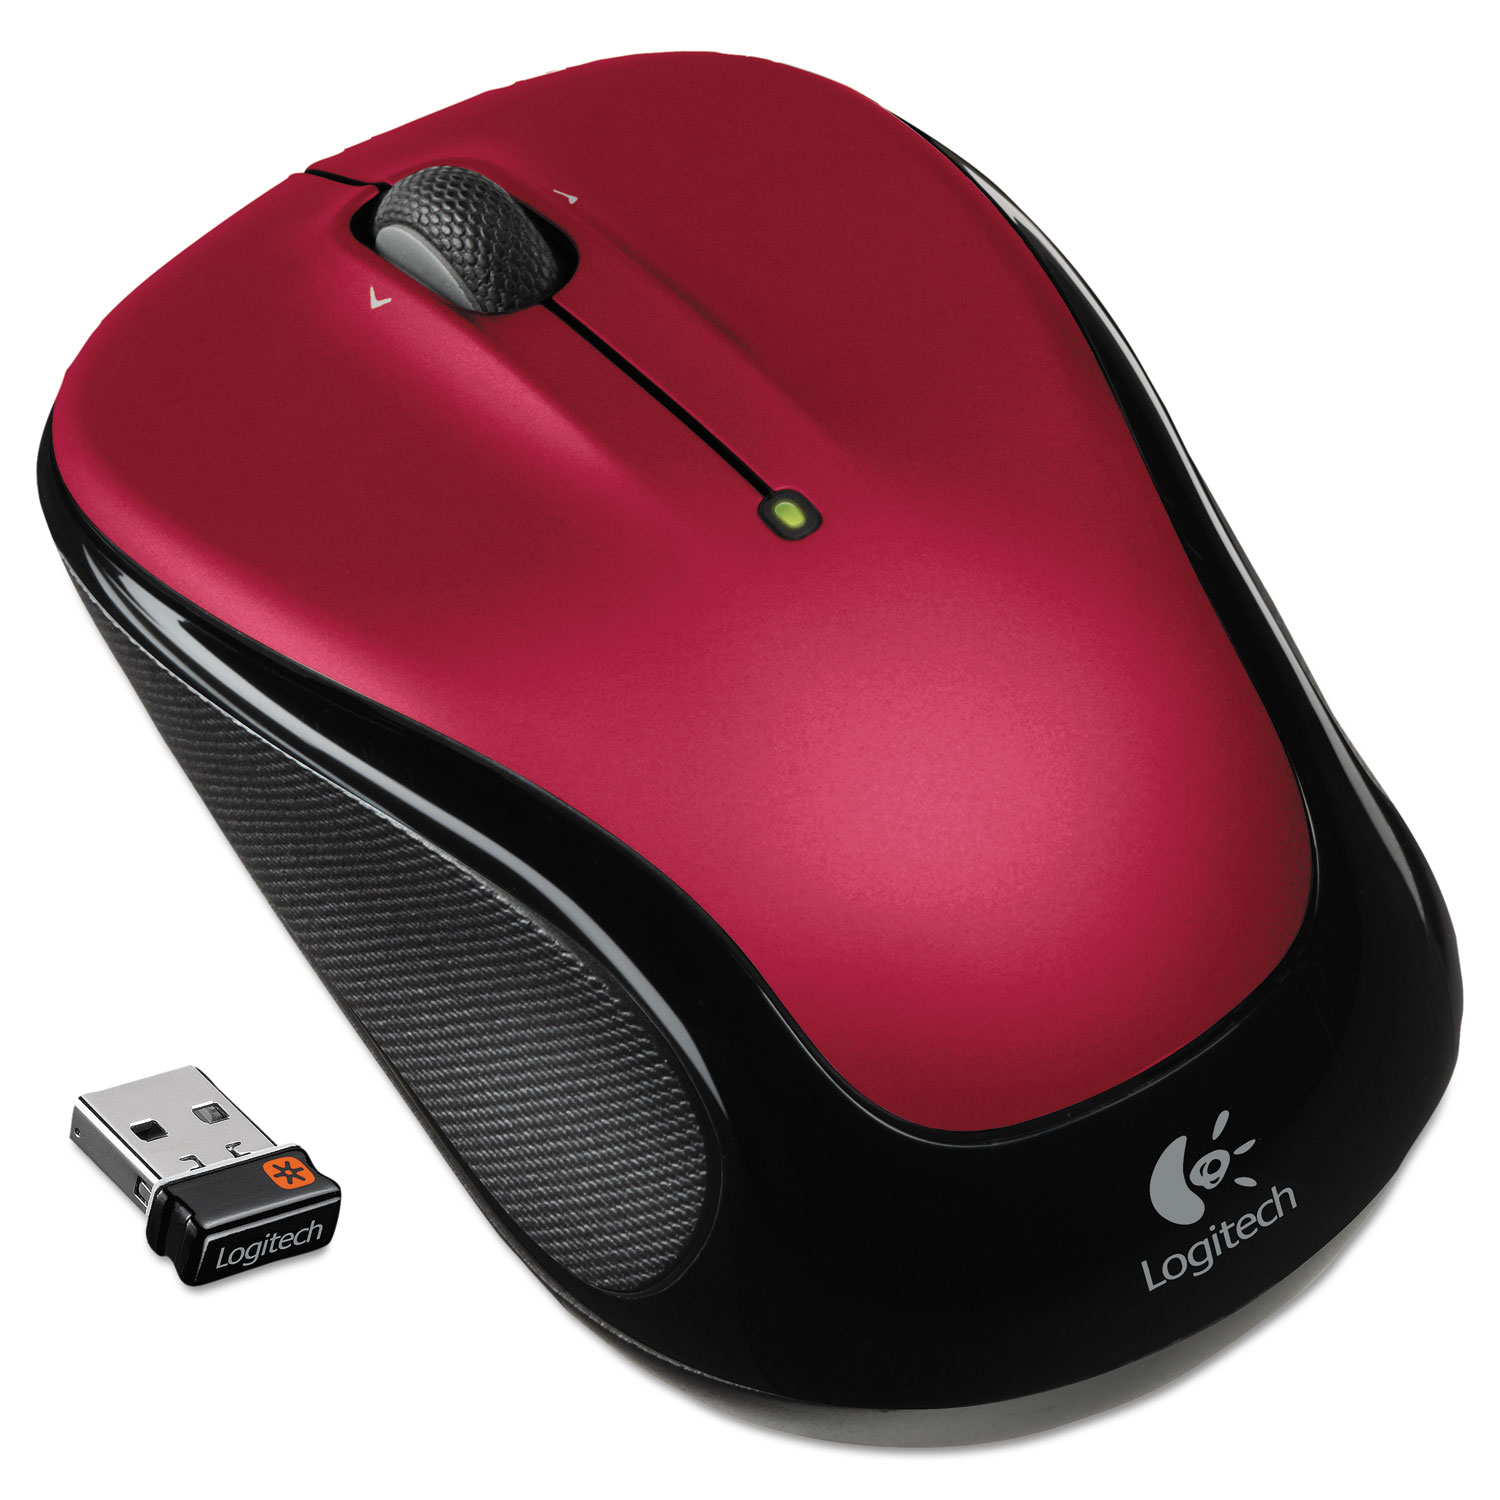  Logitech 910-002651 M325 Wireless Mouse, 2.4 GHz Frequency/30 ft Wireless Range, Left/Right Hand Use, Red (LOG910002651) 